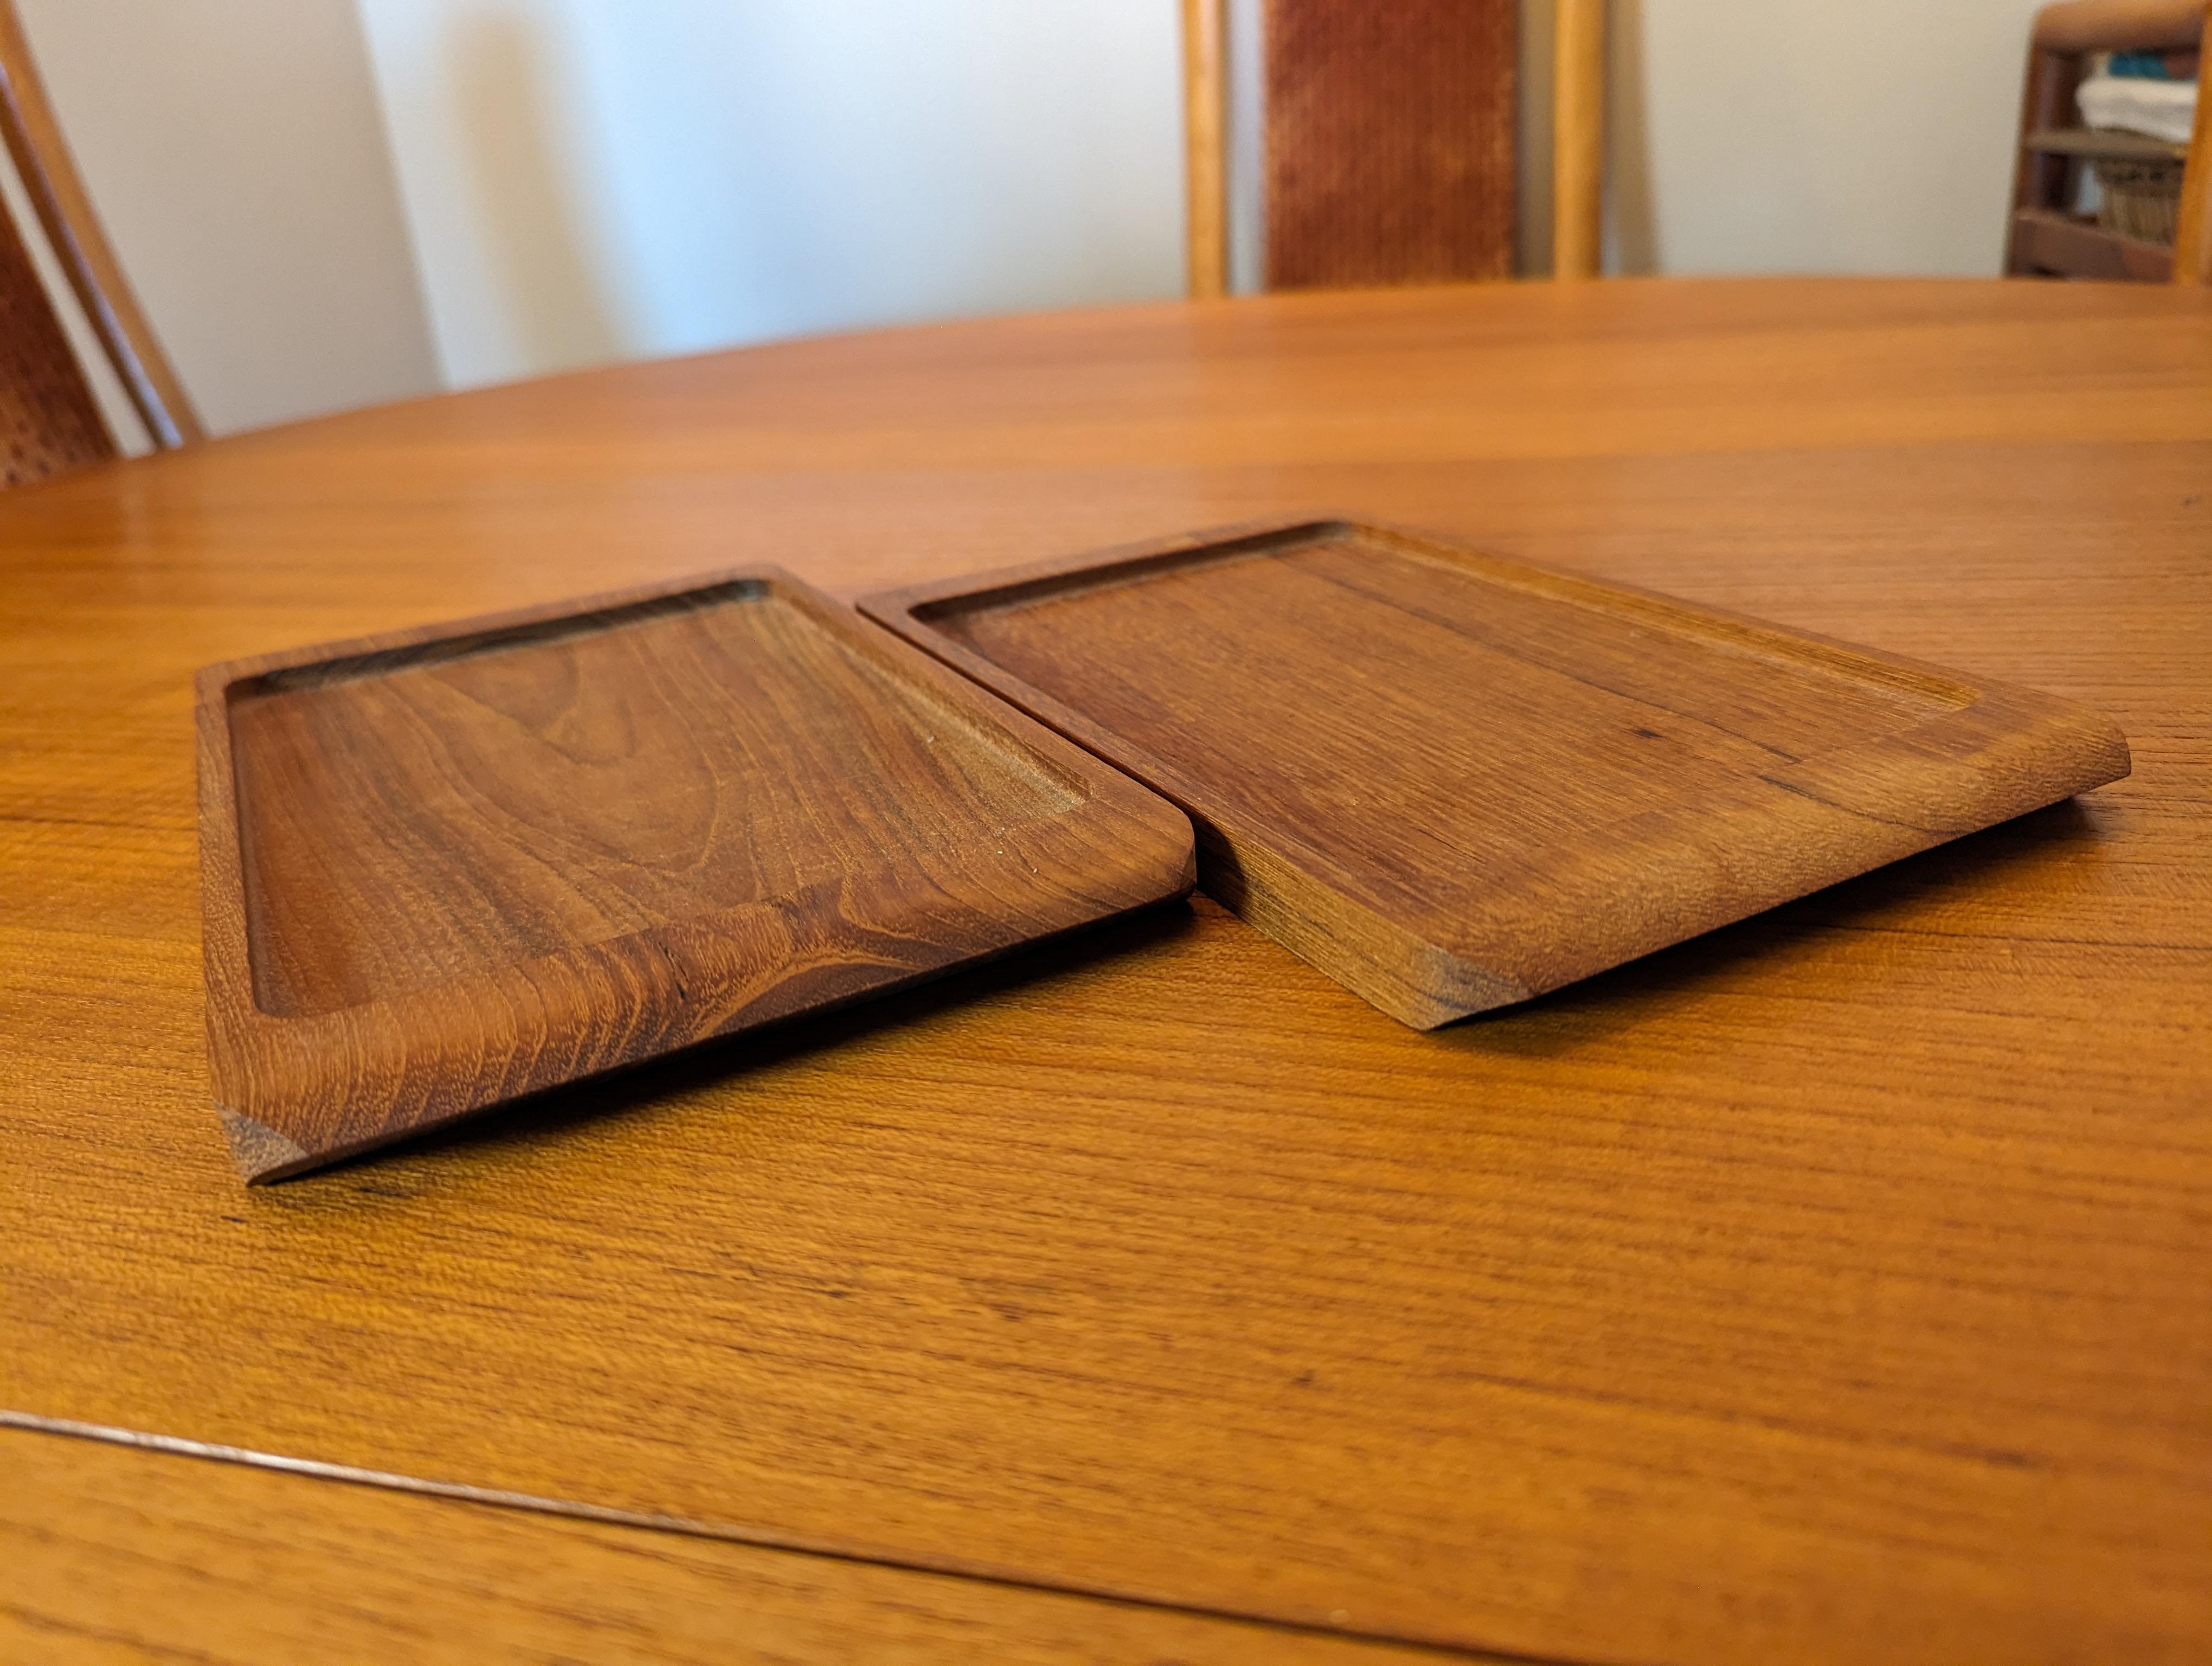 Just in, a pair of teak trays by Laurids Lønborg. Overall great condition for their age, these were sourced from a Hollywood Estate in California. Each measure approximately 9.75 x 5.75. If you have any questions, please feel free to reach out!